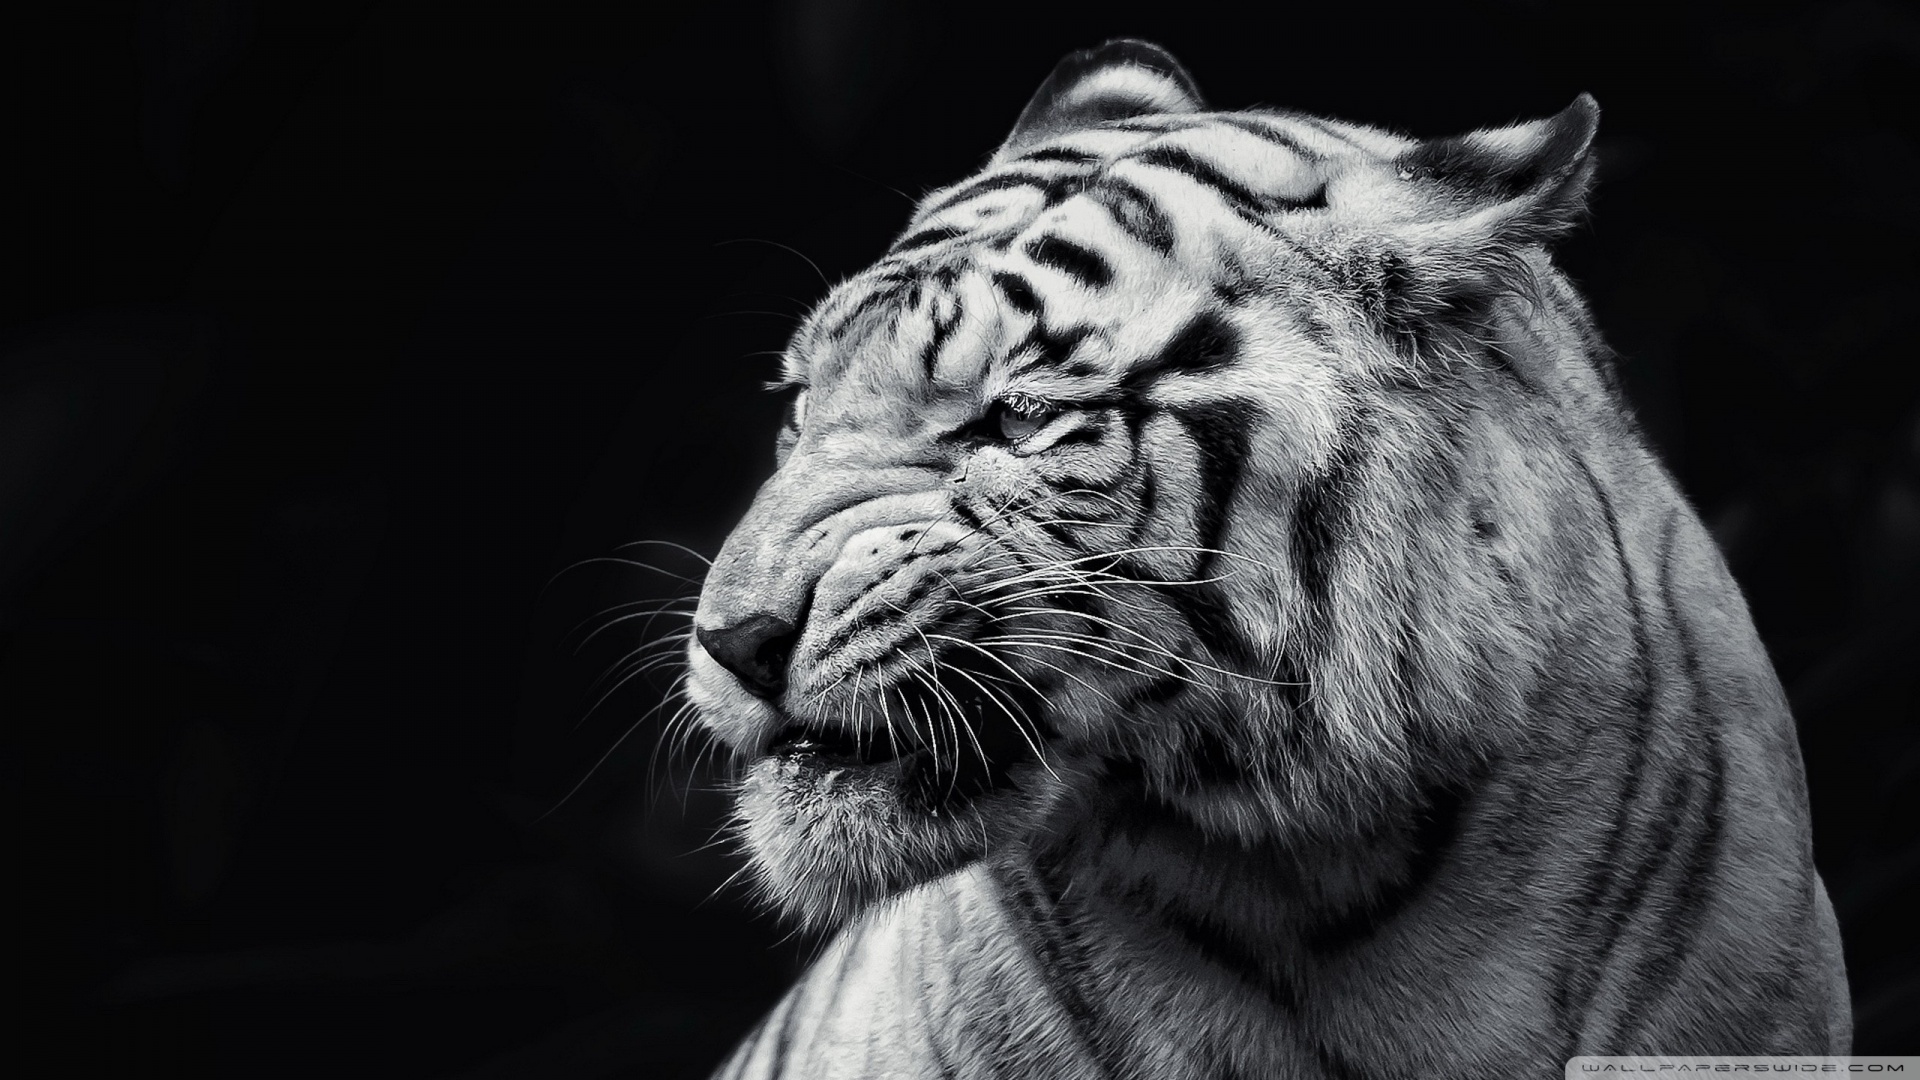 wallpaperswide.com_tiger_black_and_white_2-wallpaper-1920x1080.jpg